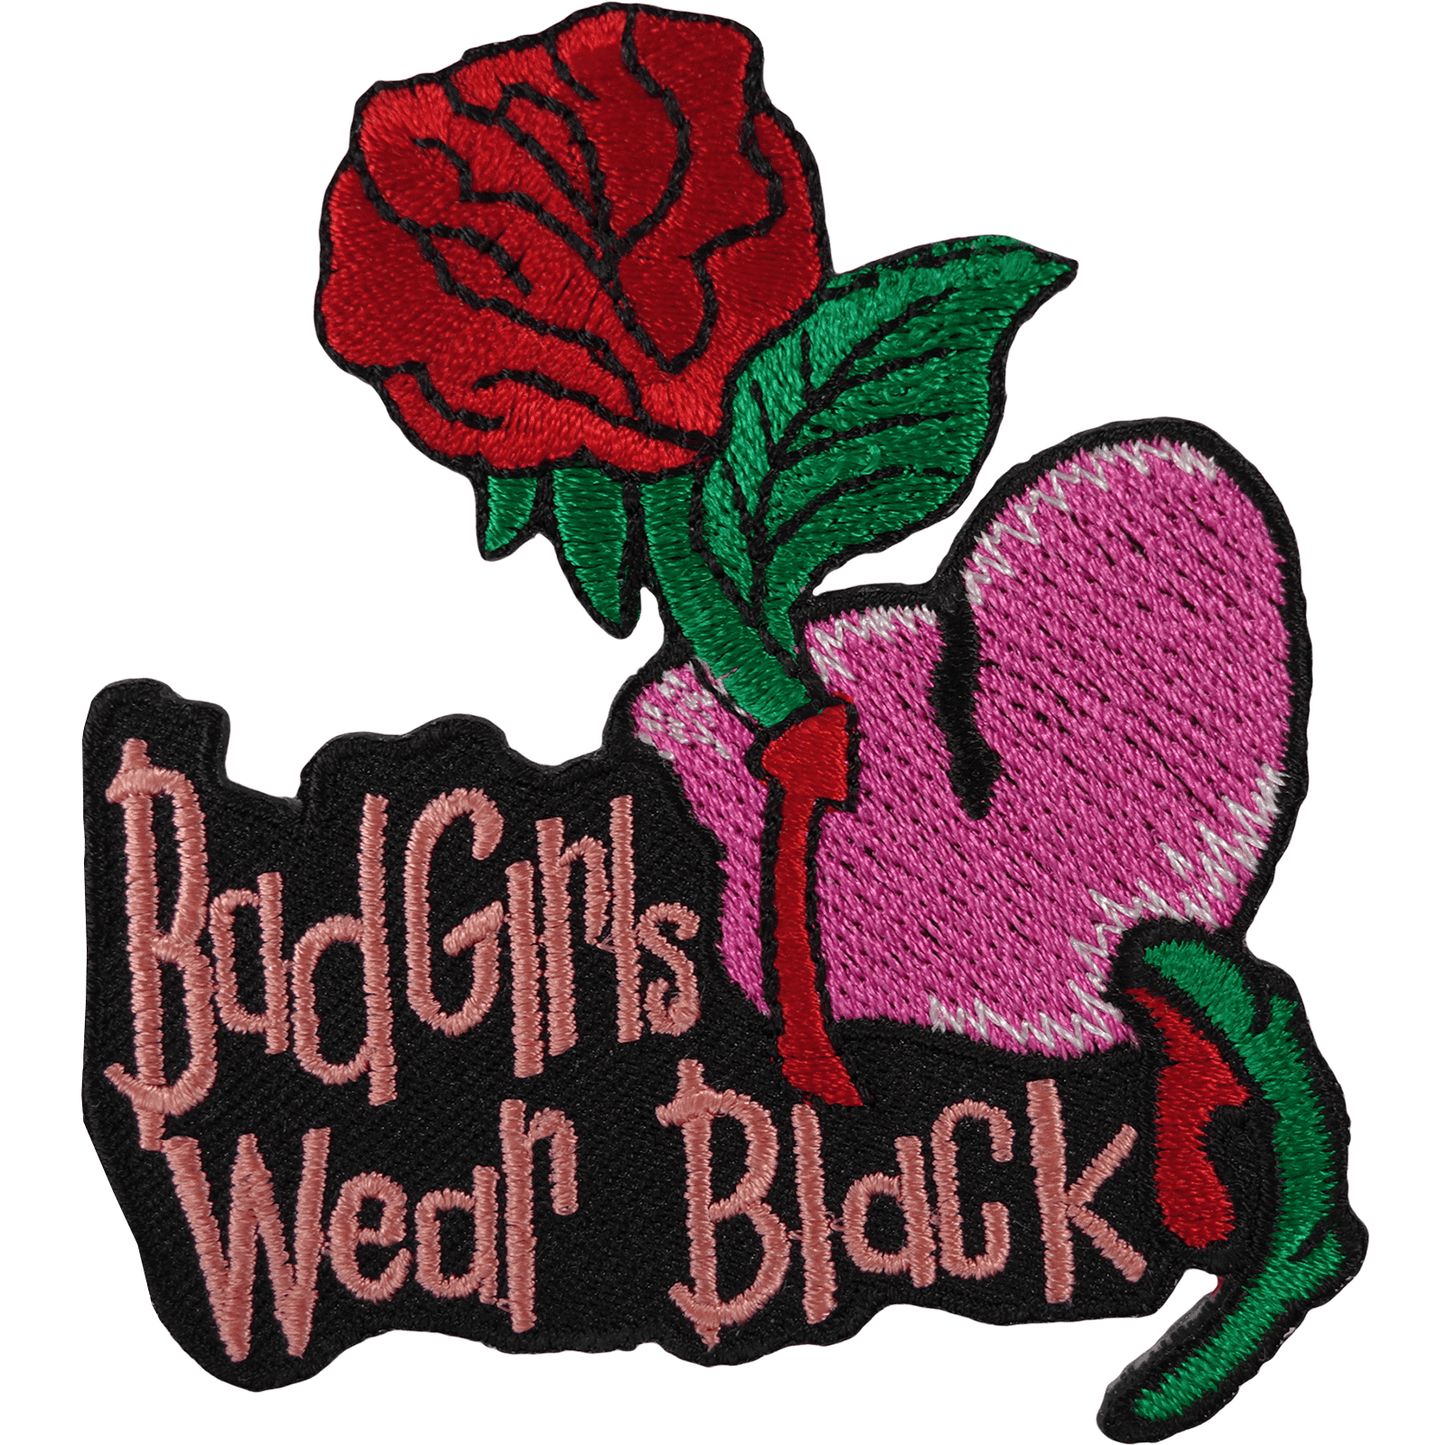 Bad Girls Wear Black Iron On Patch Sew Red Rose Flower Heart Embroidered Badge